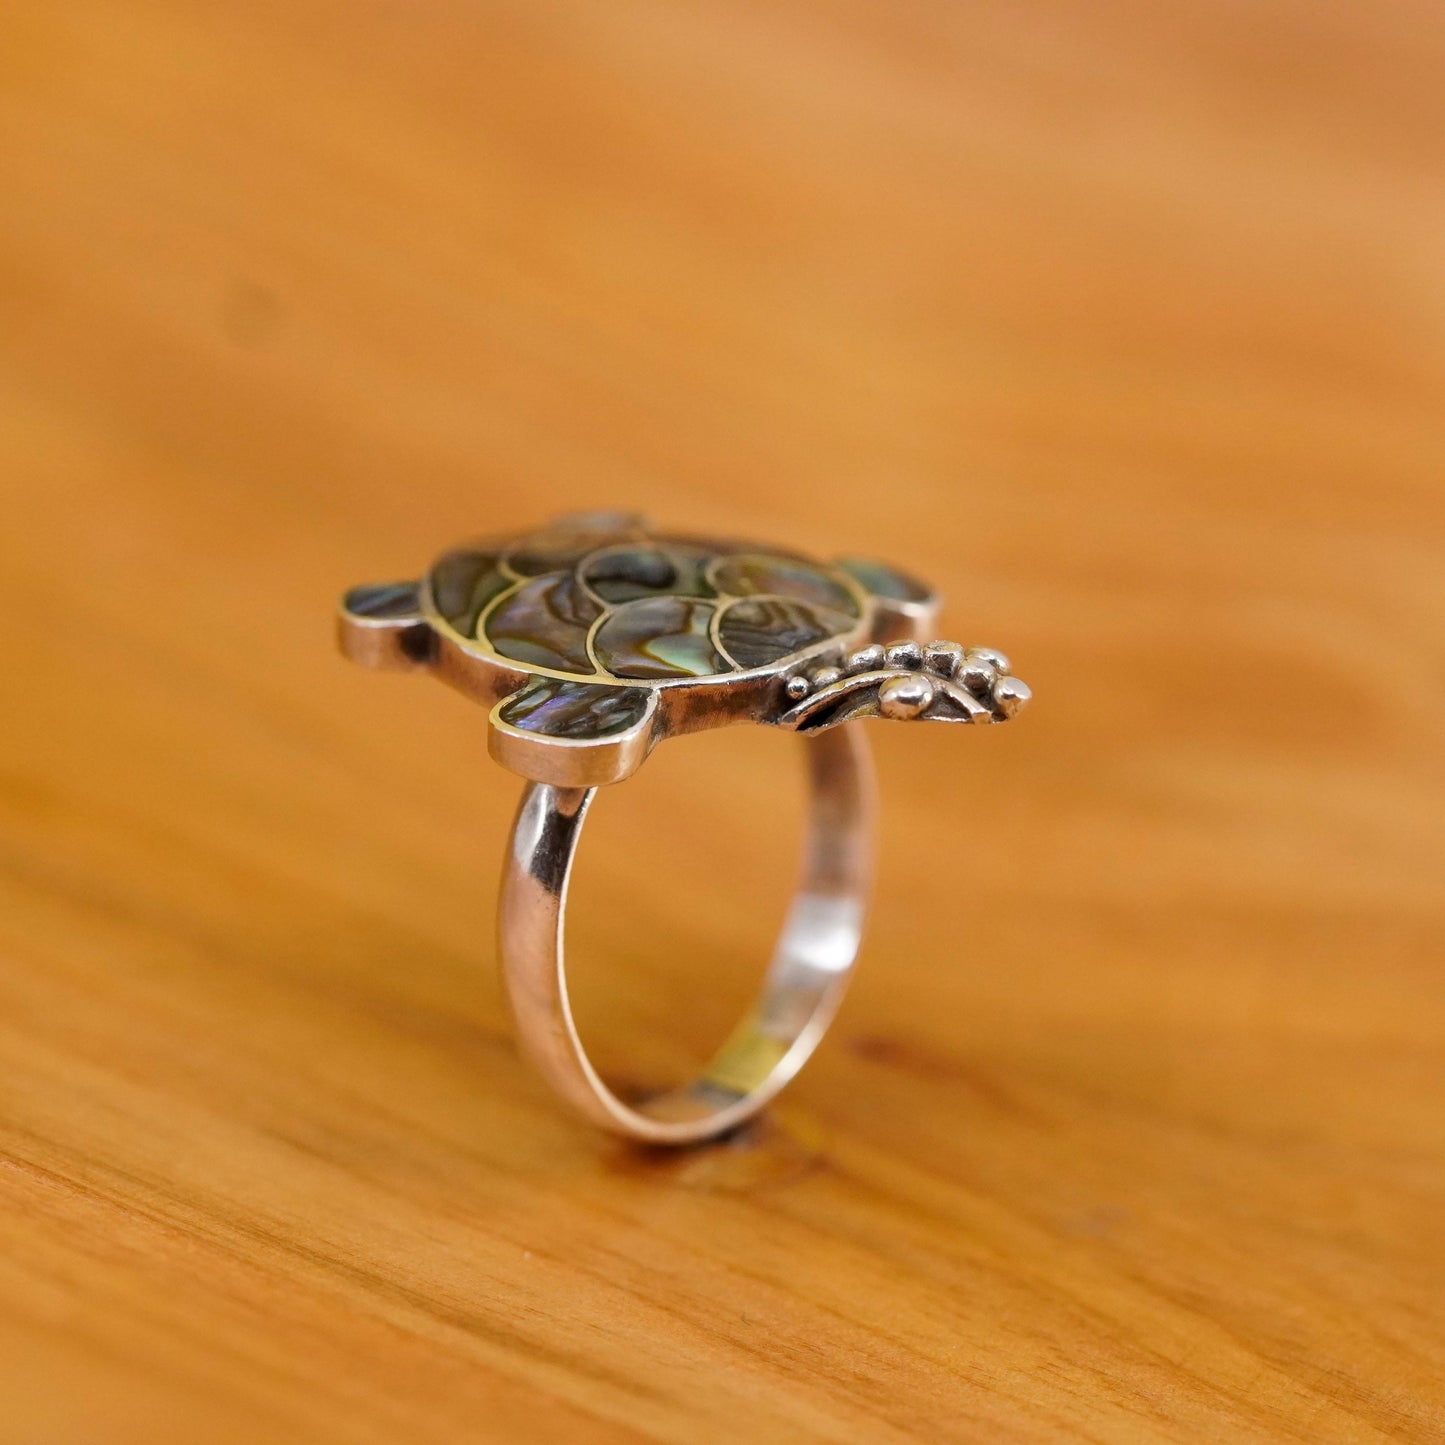 Size 8, vintage sterling silver handmade ring, 925 turtle band with abalone